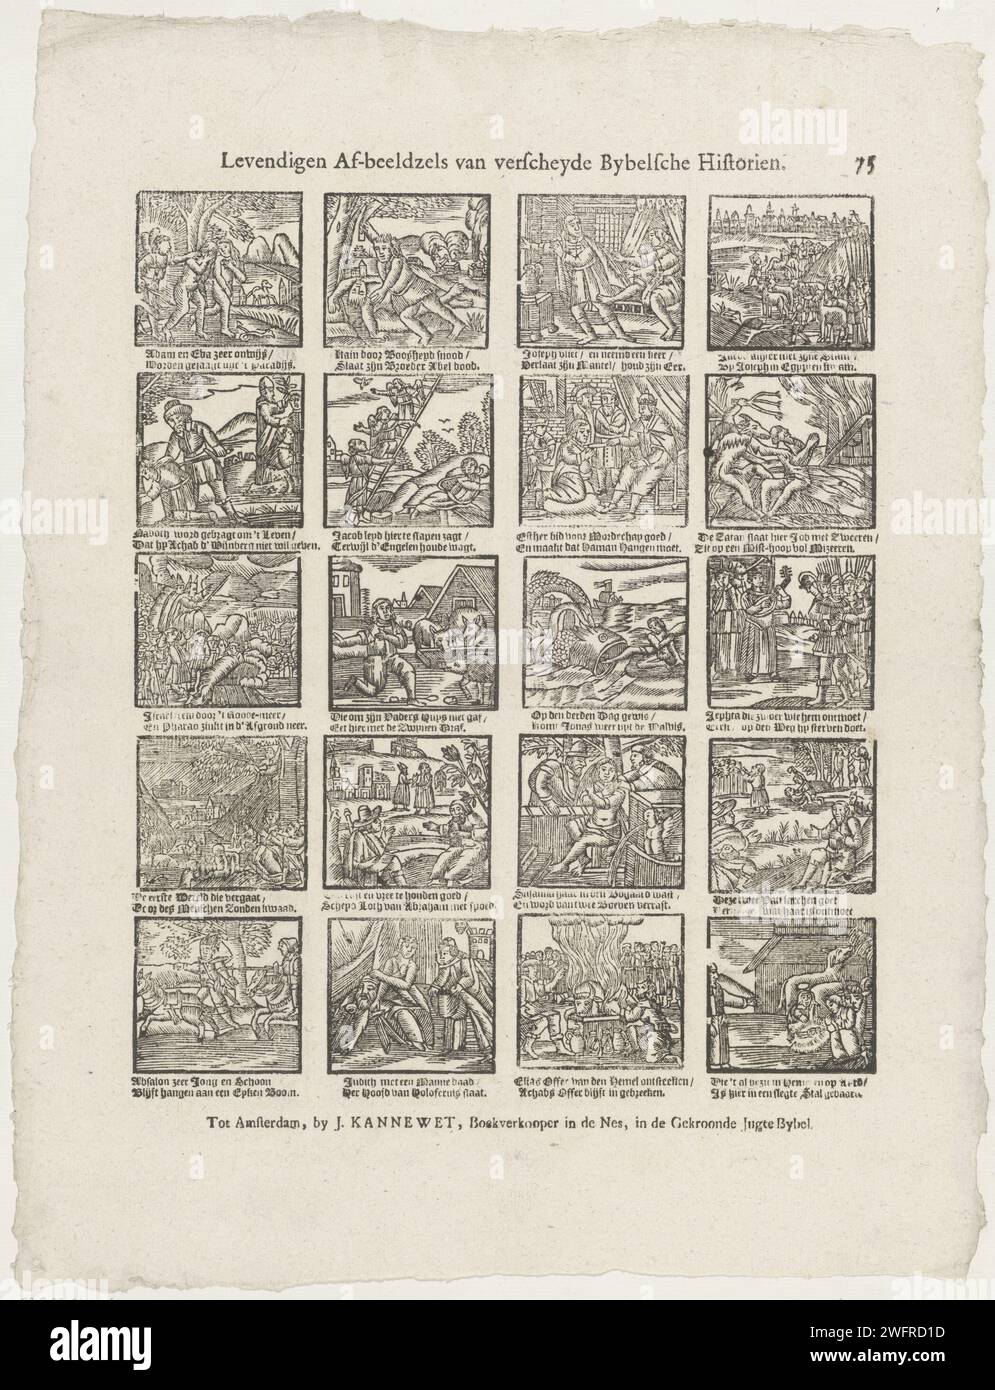 LIVEIGN AFBIETSES OF VERSHYDE Bybelsche Historien, 1725 - 1780 print Leaf with 20 performances of stories from the Old Testament, including Adam and Eva that are driven out of paradise and Jonah that is thrown on dry land. Under each image a two -way verse. Numbered at the top right: 75. publisher: Amsterdamprint maker: Netherlands paper letterpress printing Old Testament Stock Photo